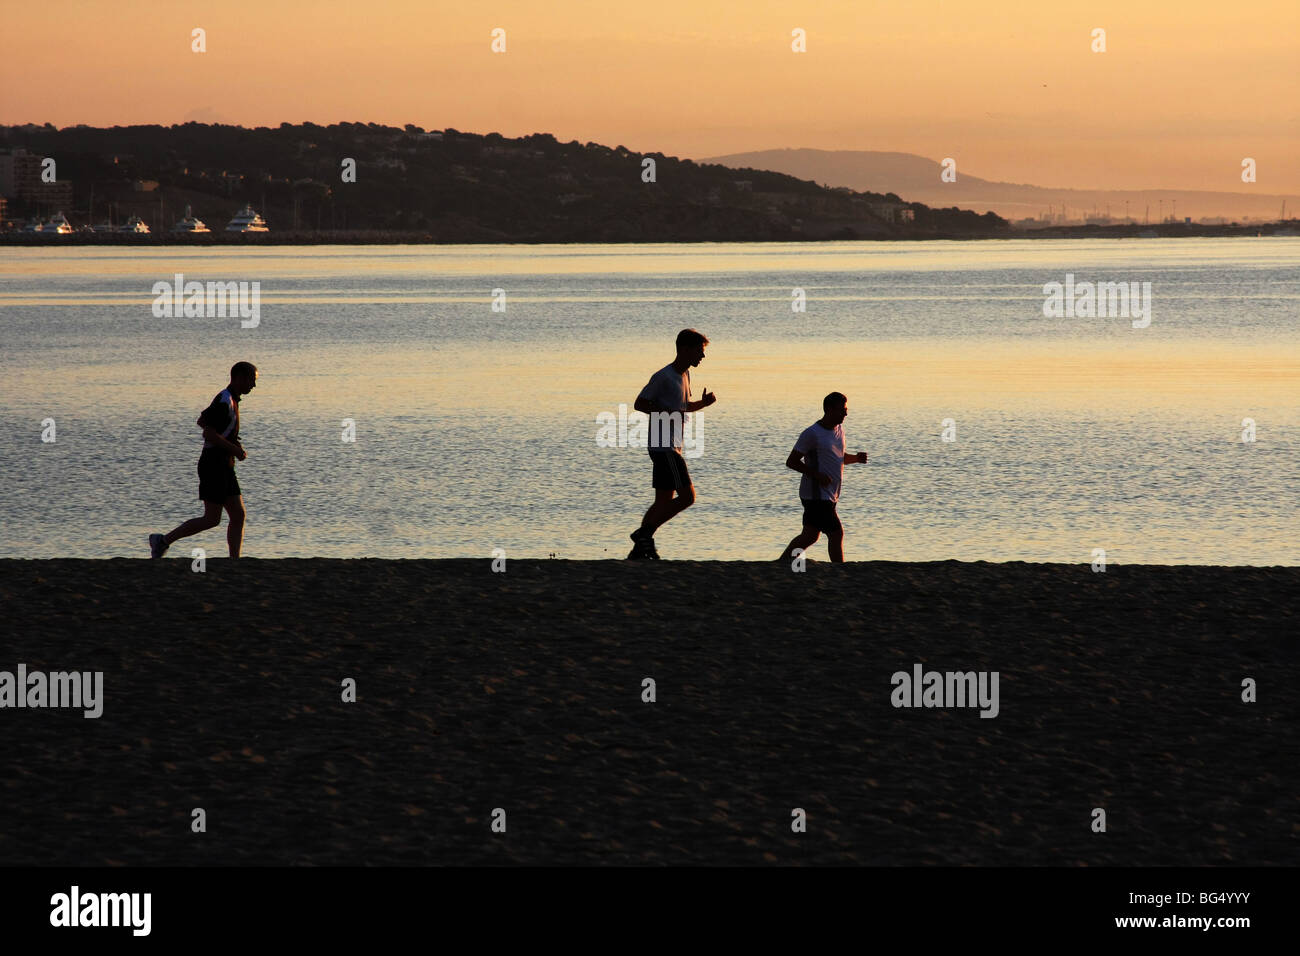 Joggers on the beach in Majorca before sunrise in silhouette. Stock Photo